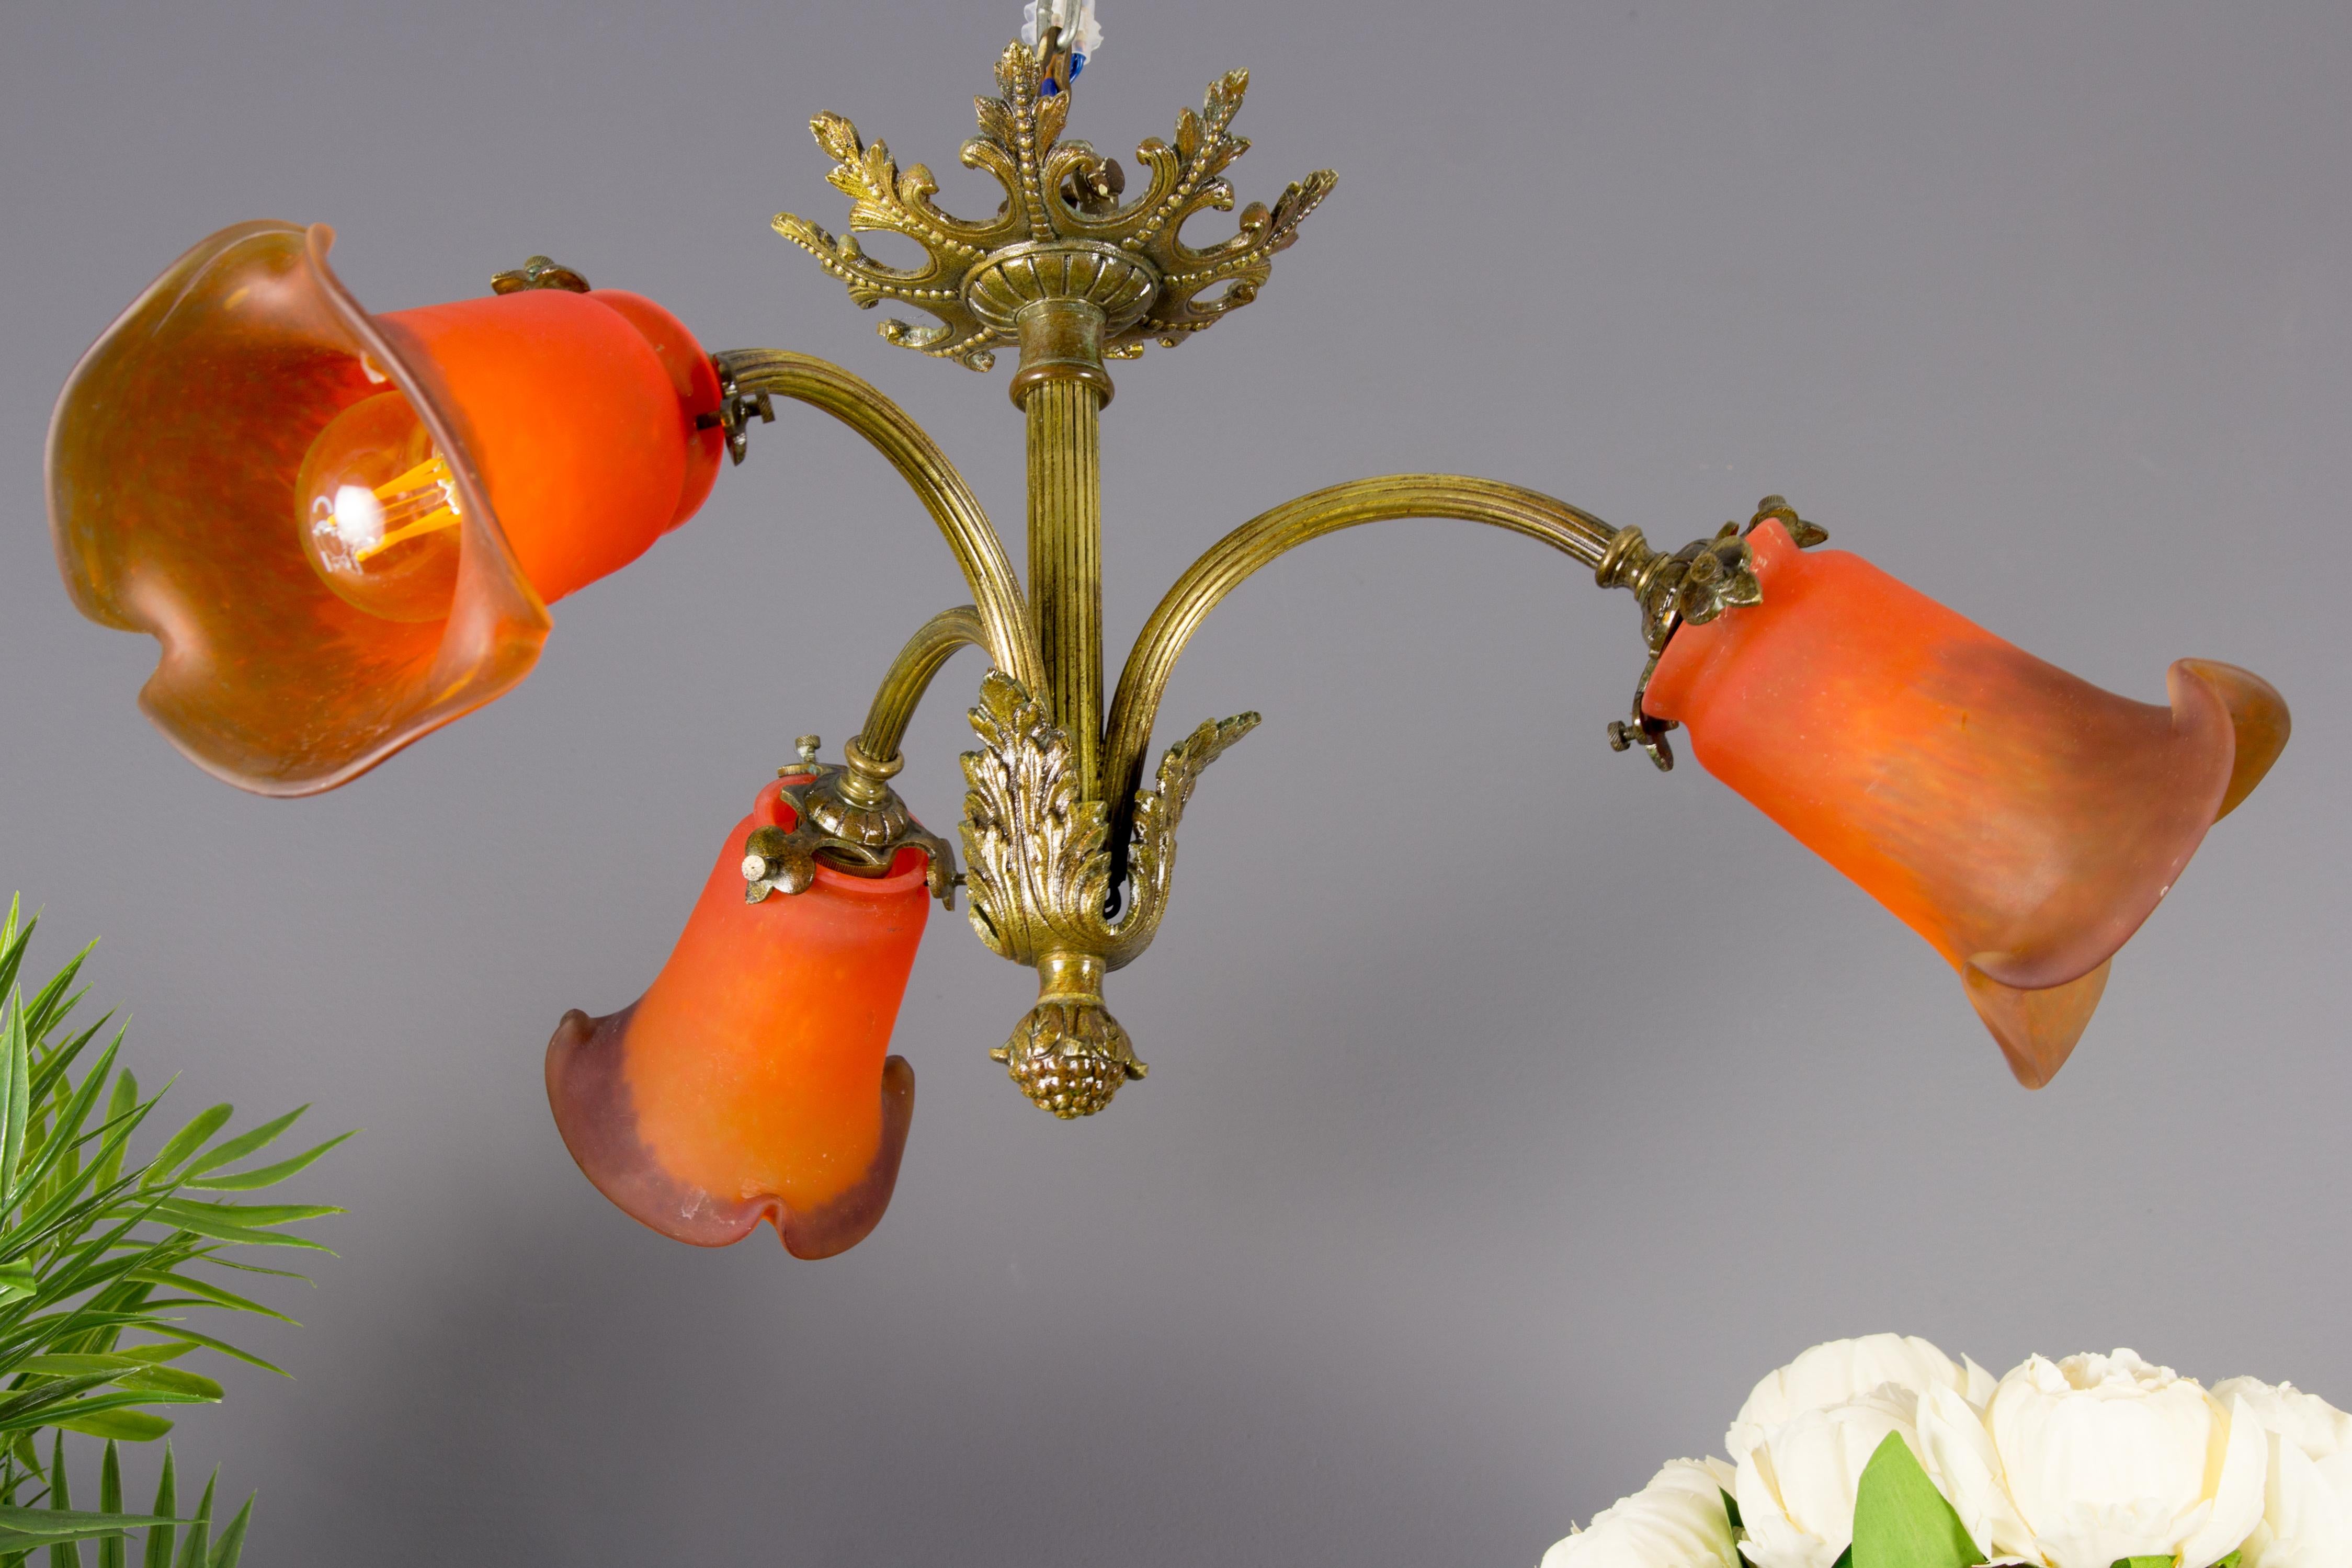 A Small but fine French Louis XVI-style chandelier. Three bronze branches, each with a red Pâte de Verre glass shade, socket for B22 size light bulb.
Dimensions: diameter 49 cm / 19.29 in; height 24 cm / 9.44 in.
The light fixture is in complete